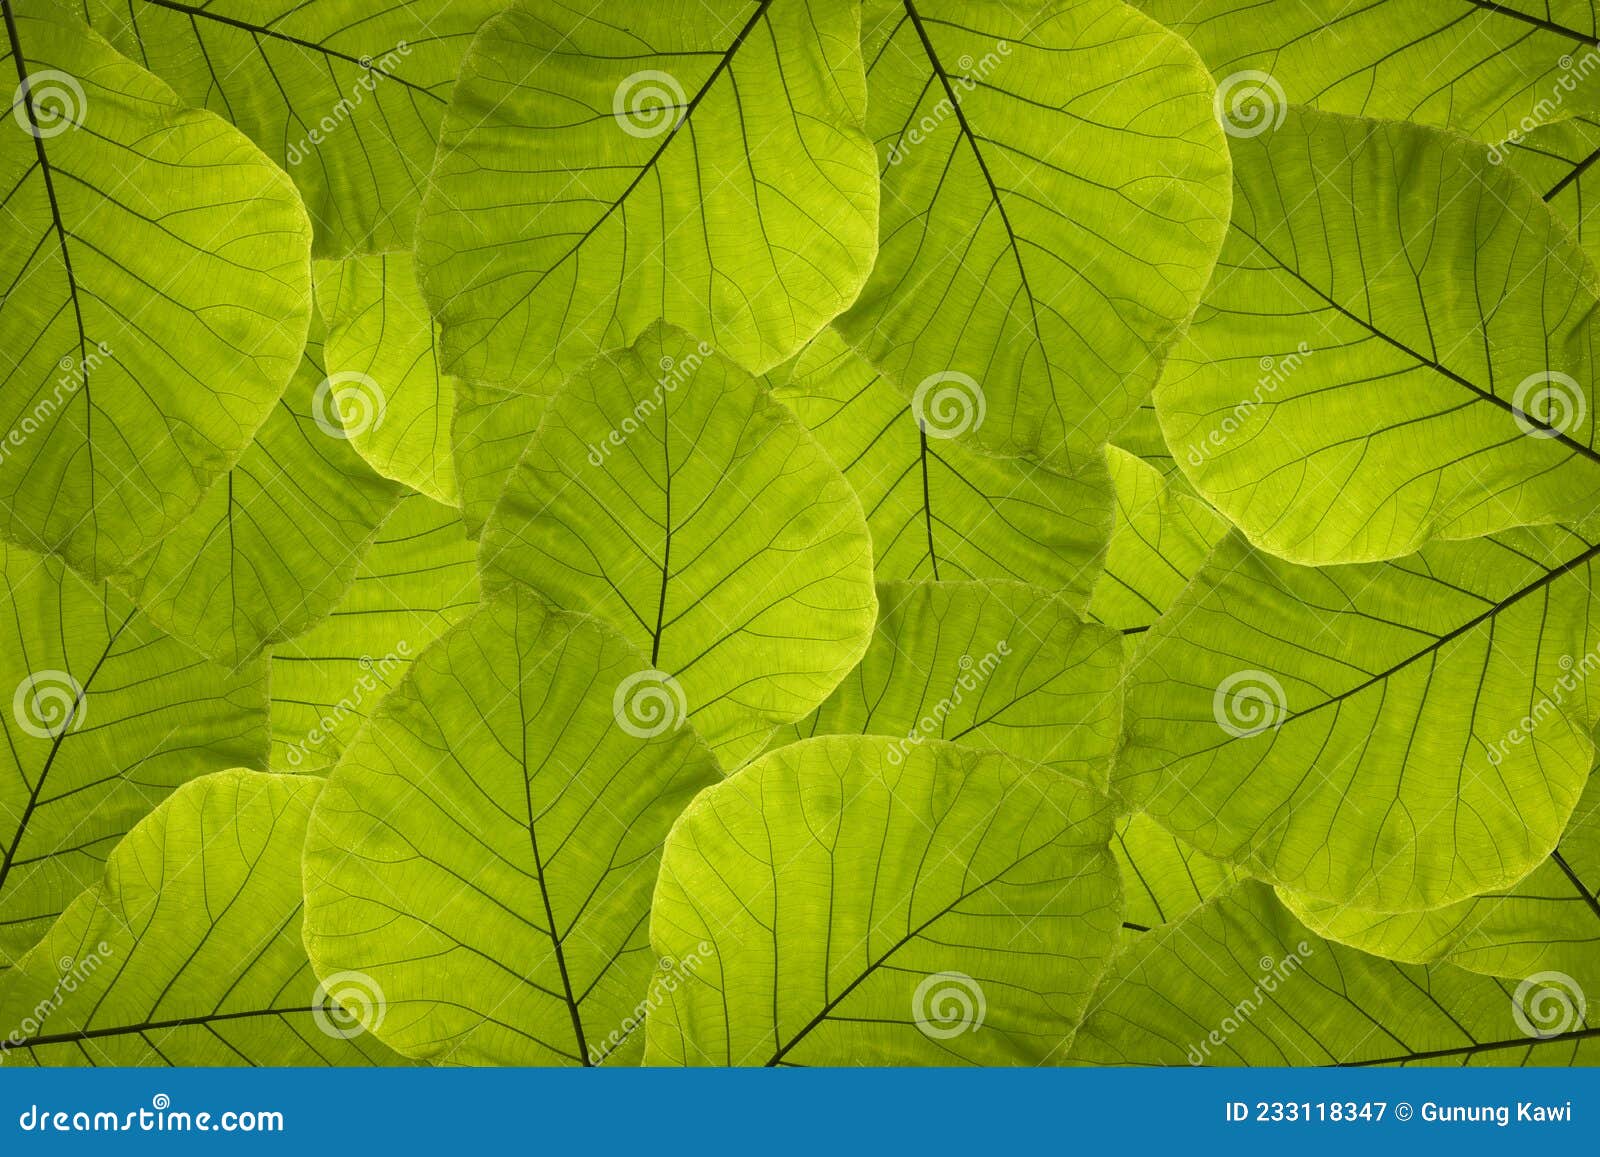 green leaves. green tropical background in watercolor style.  natural, botanical, elegant pattern. save